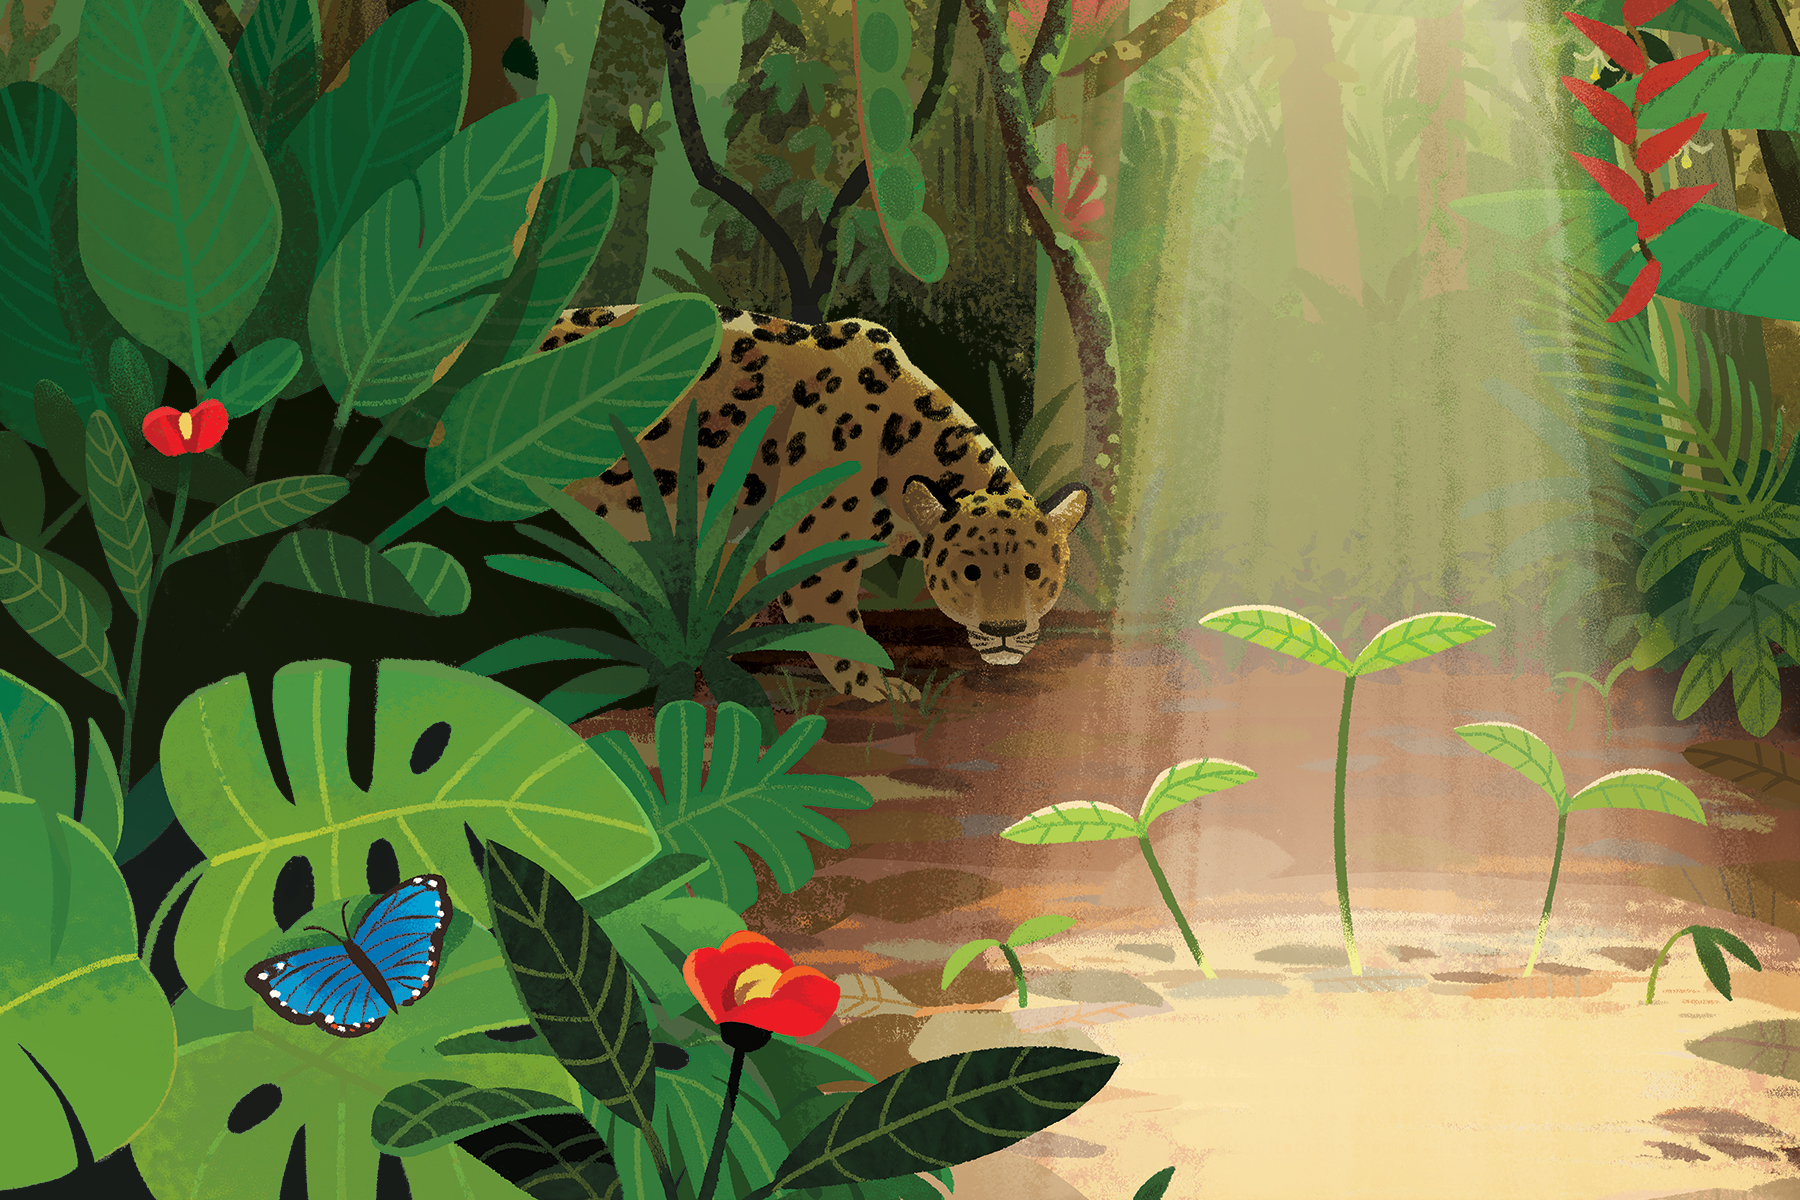 An illustration by Kim Smith for The Green Planet. It shows three small plants growing in the sunlight in the jungle and behind them a leopard lurks in the background